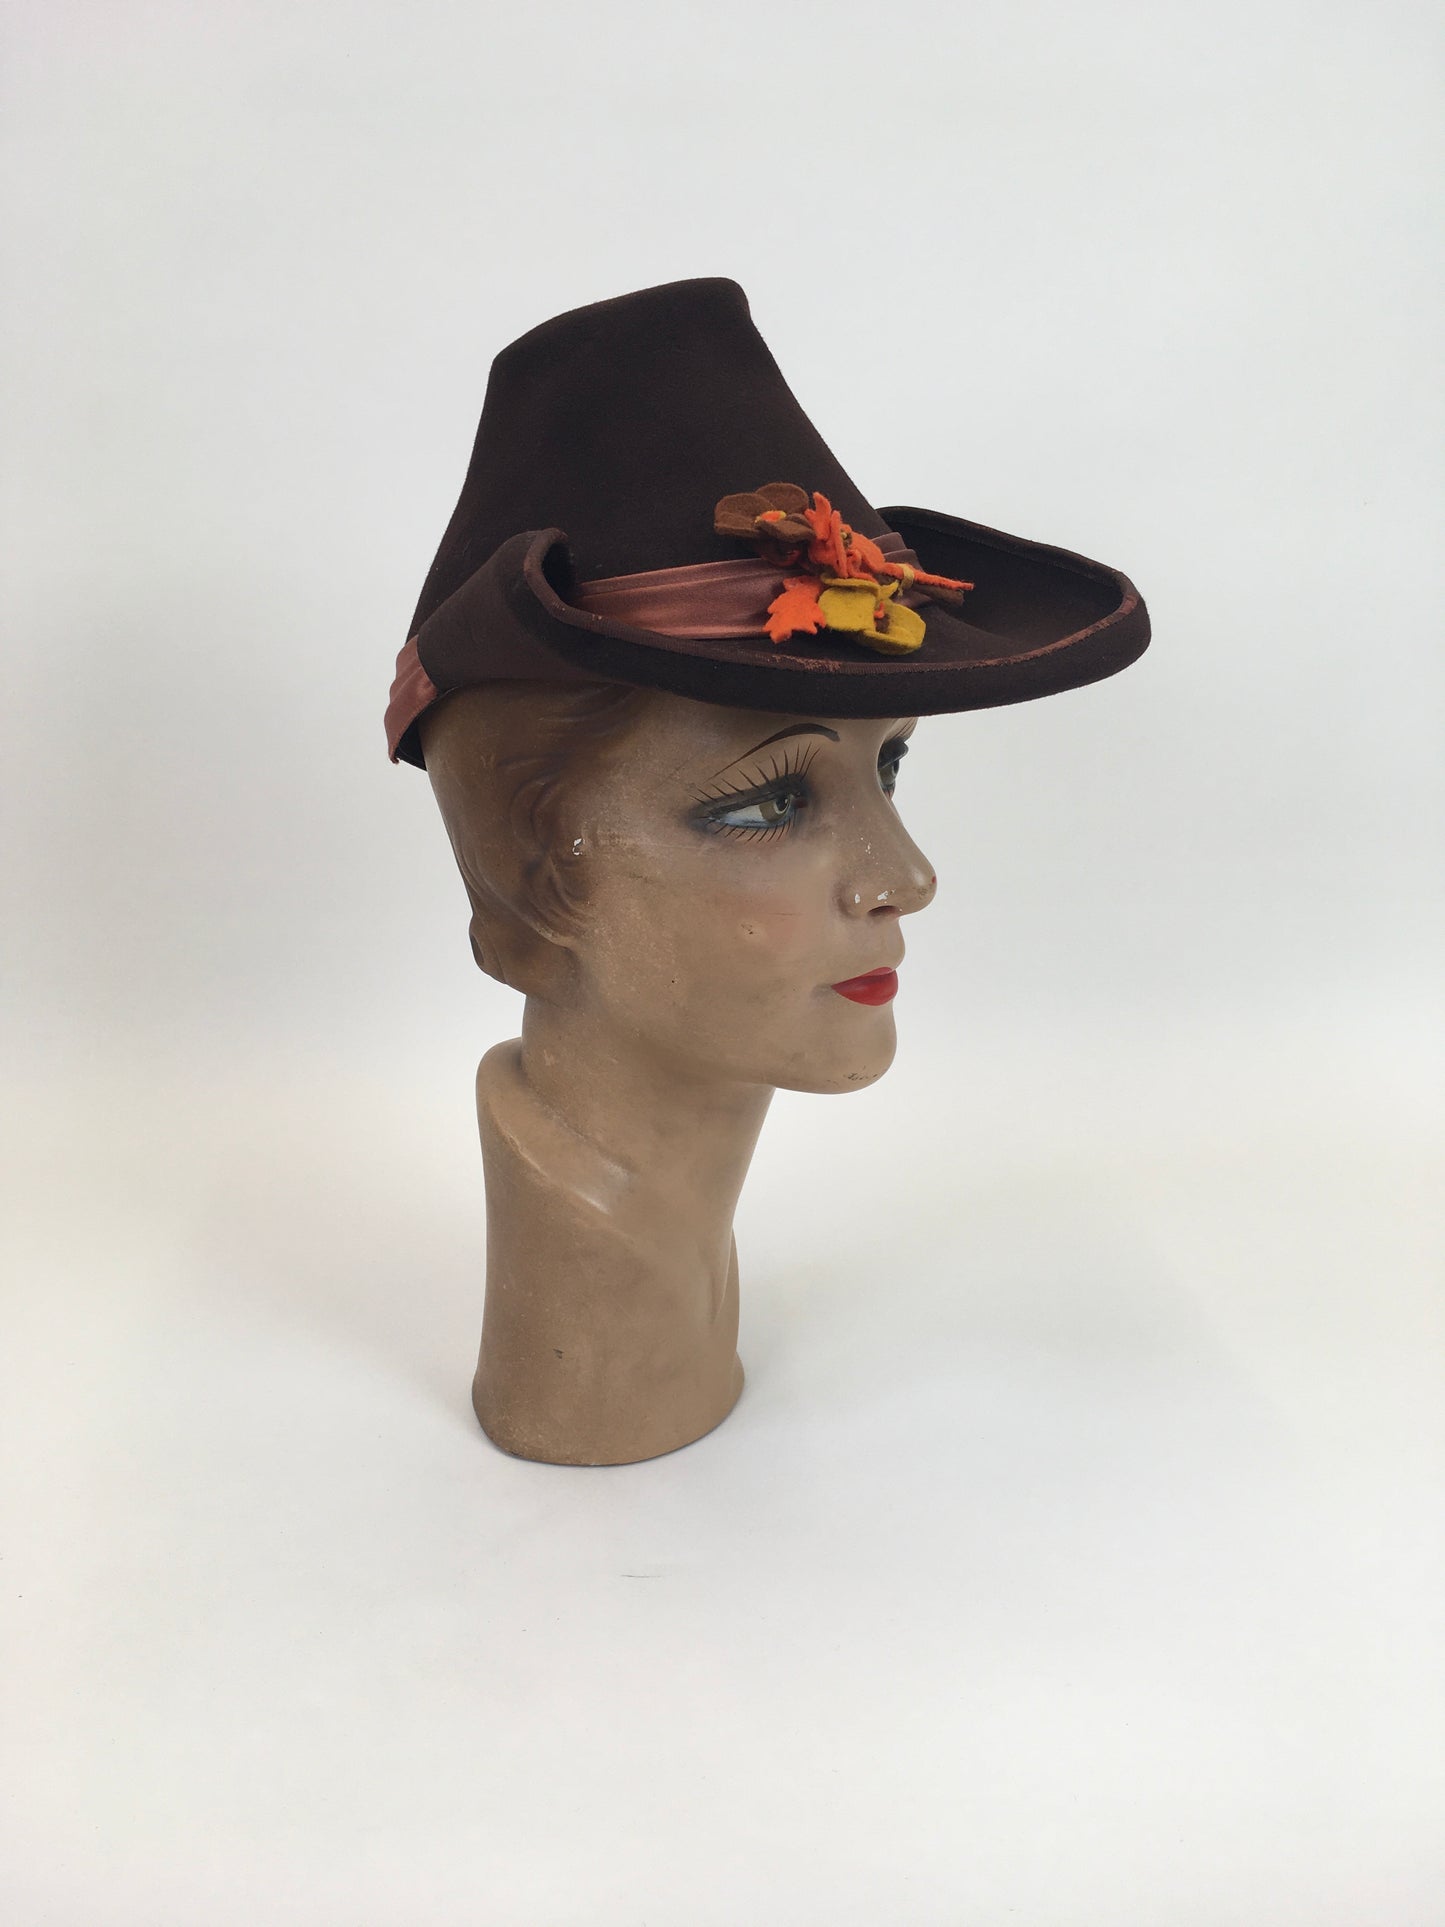 Original 1940's Sensational Fedora Hat With Funnel Top - In Warming Brown With Make Do And Mend Floral